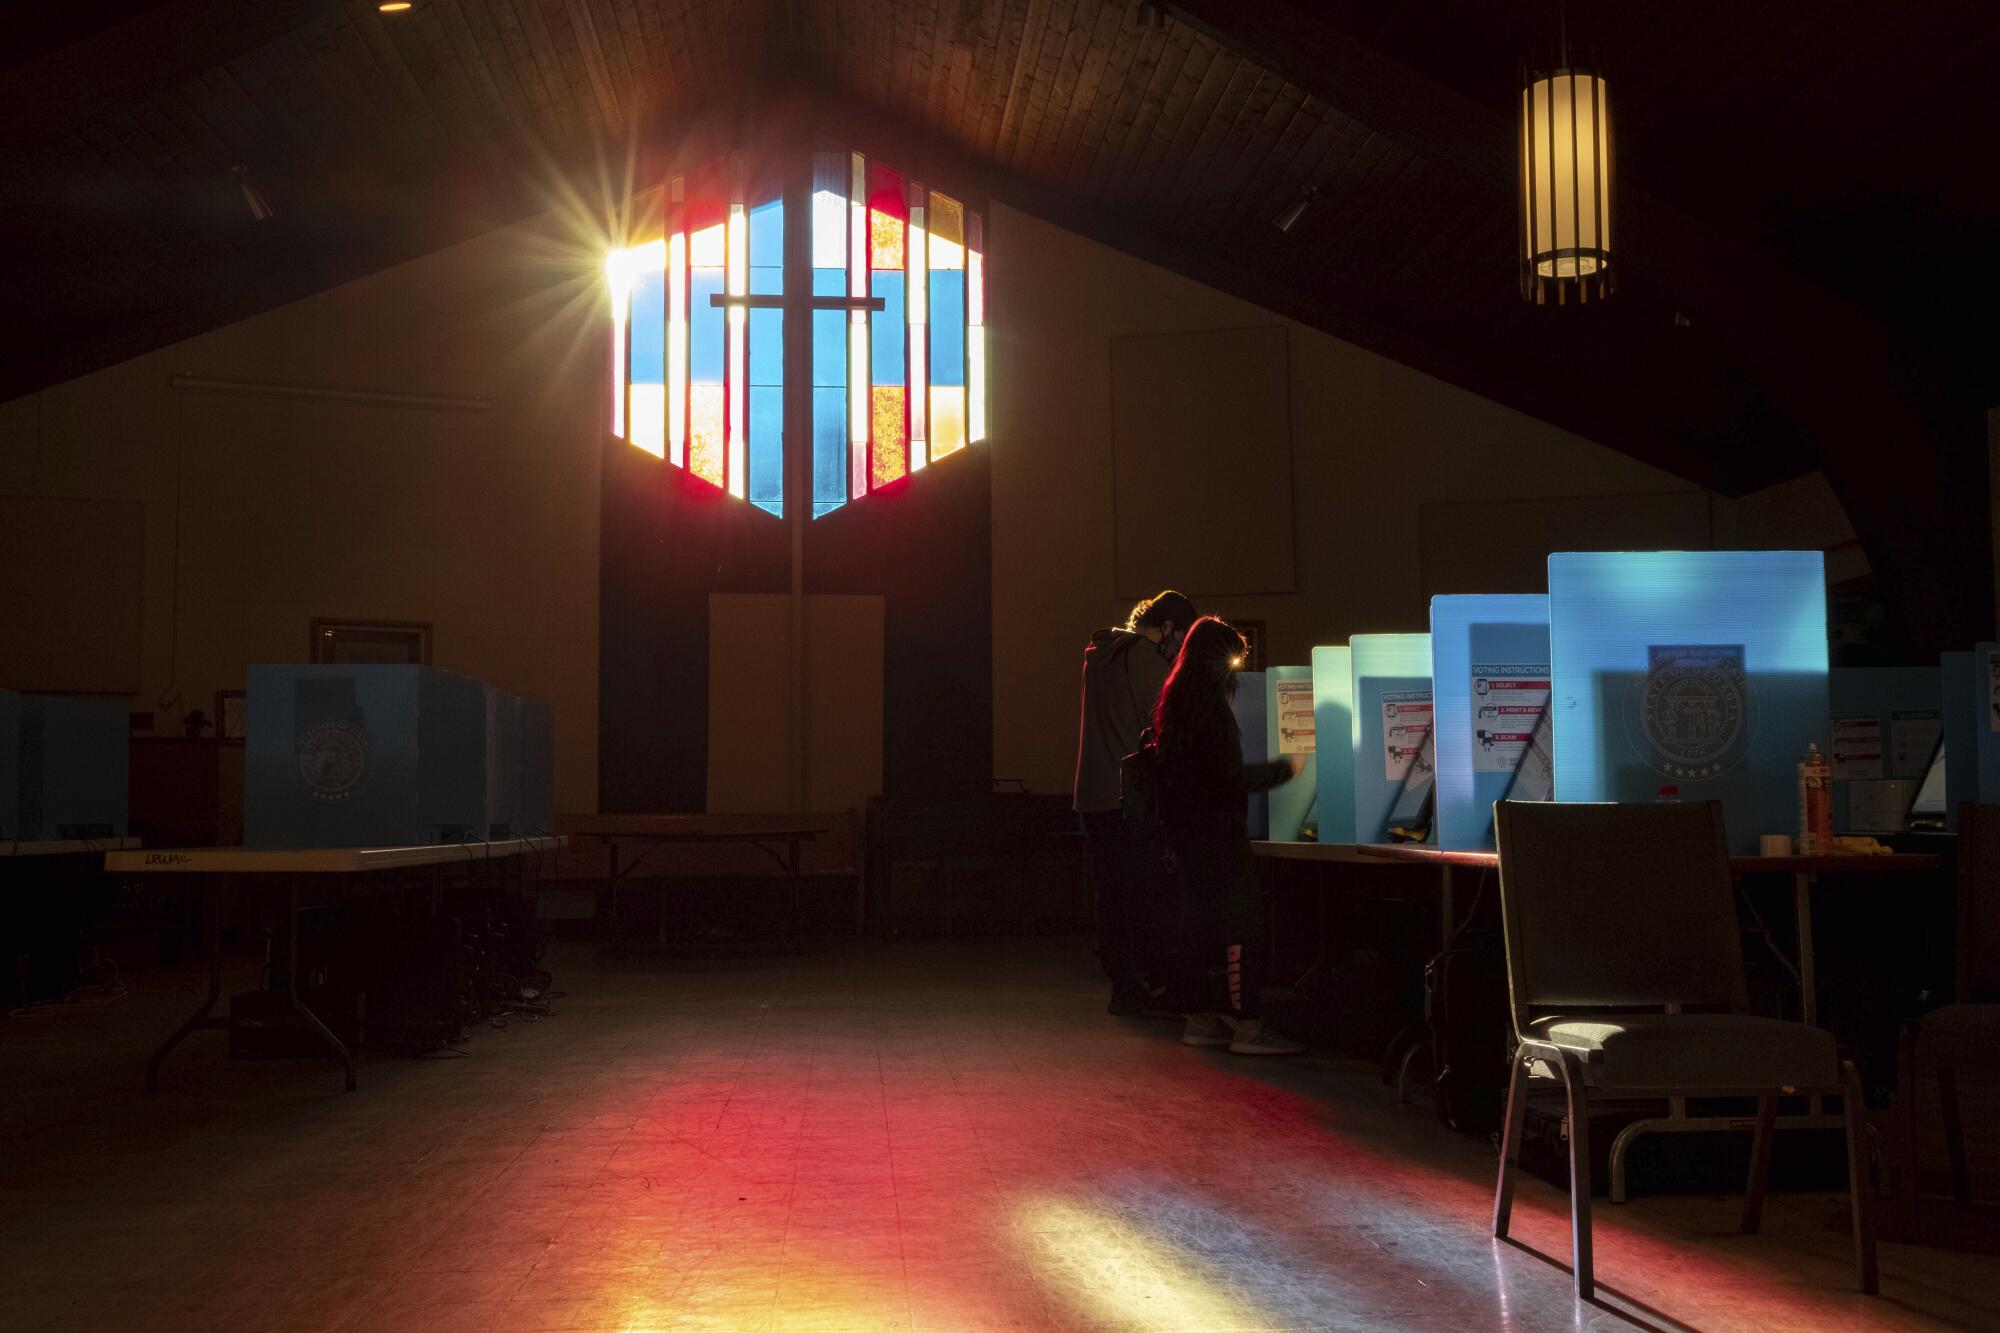 Light glows through a stained-glass window. Two voters in silhouette stand at voting stations.